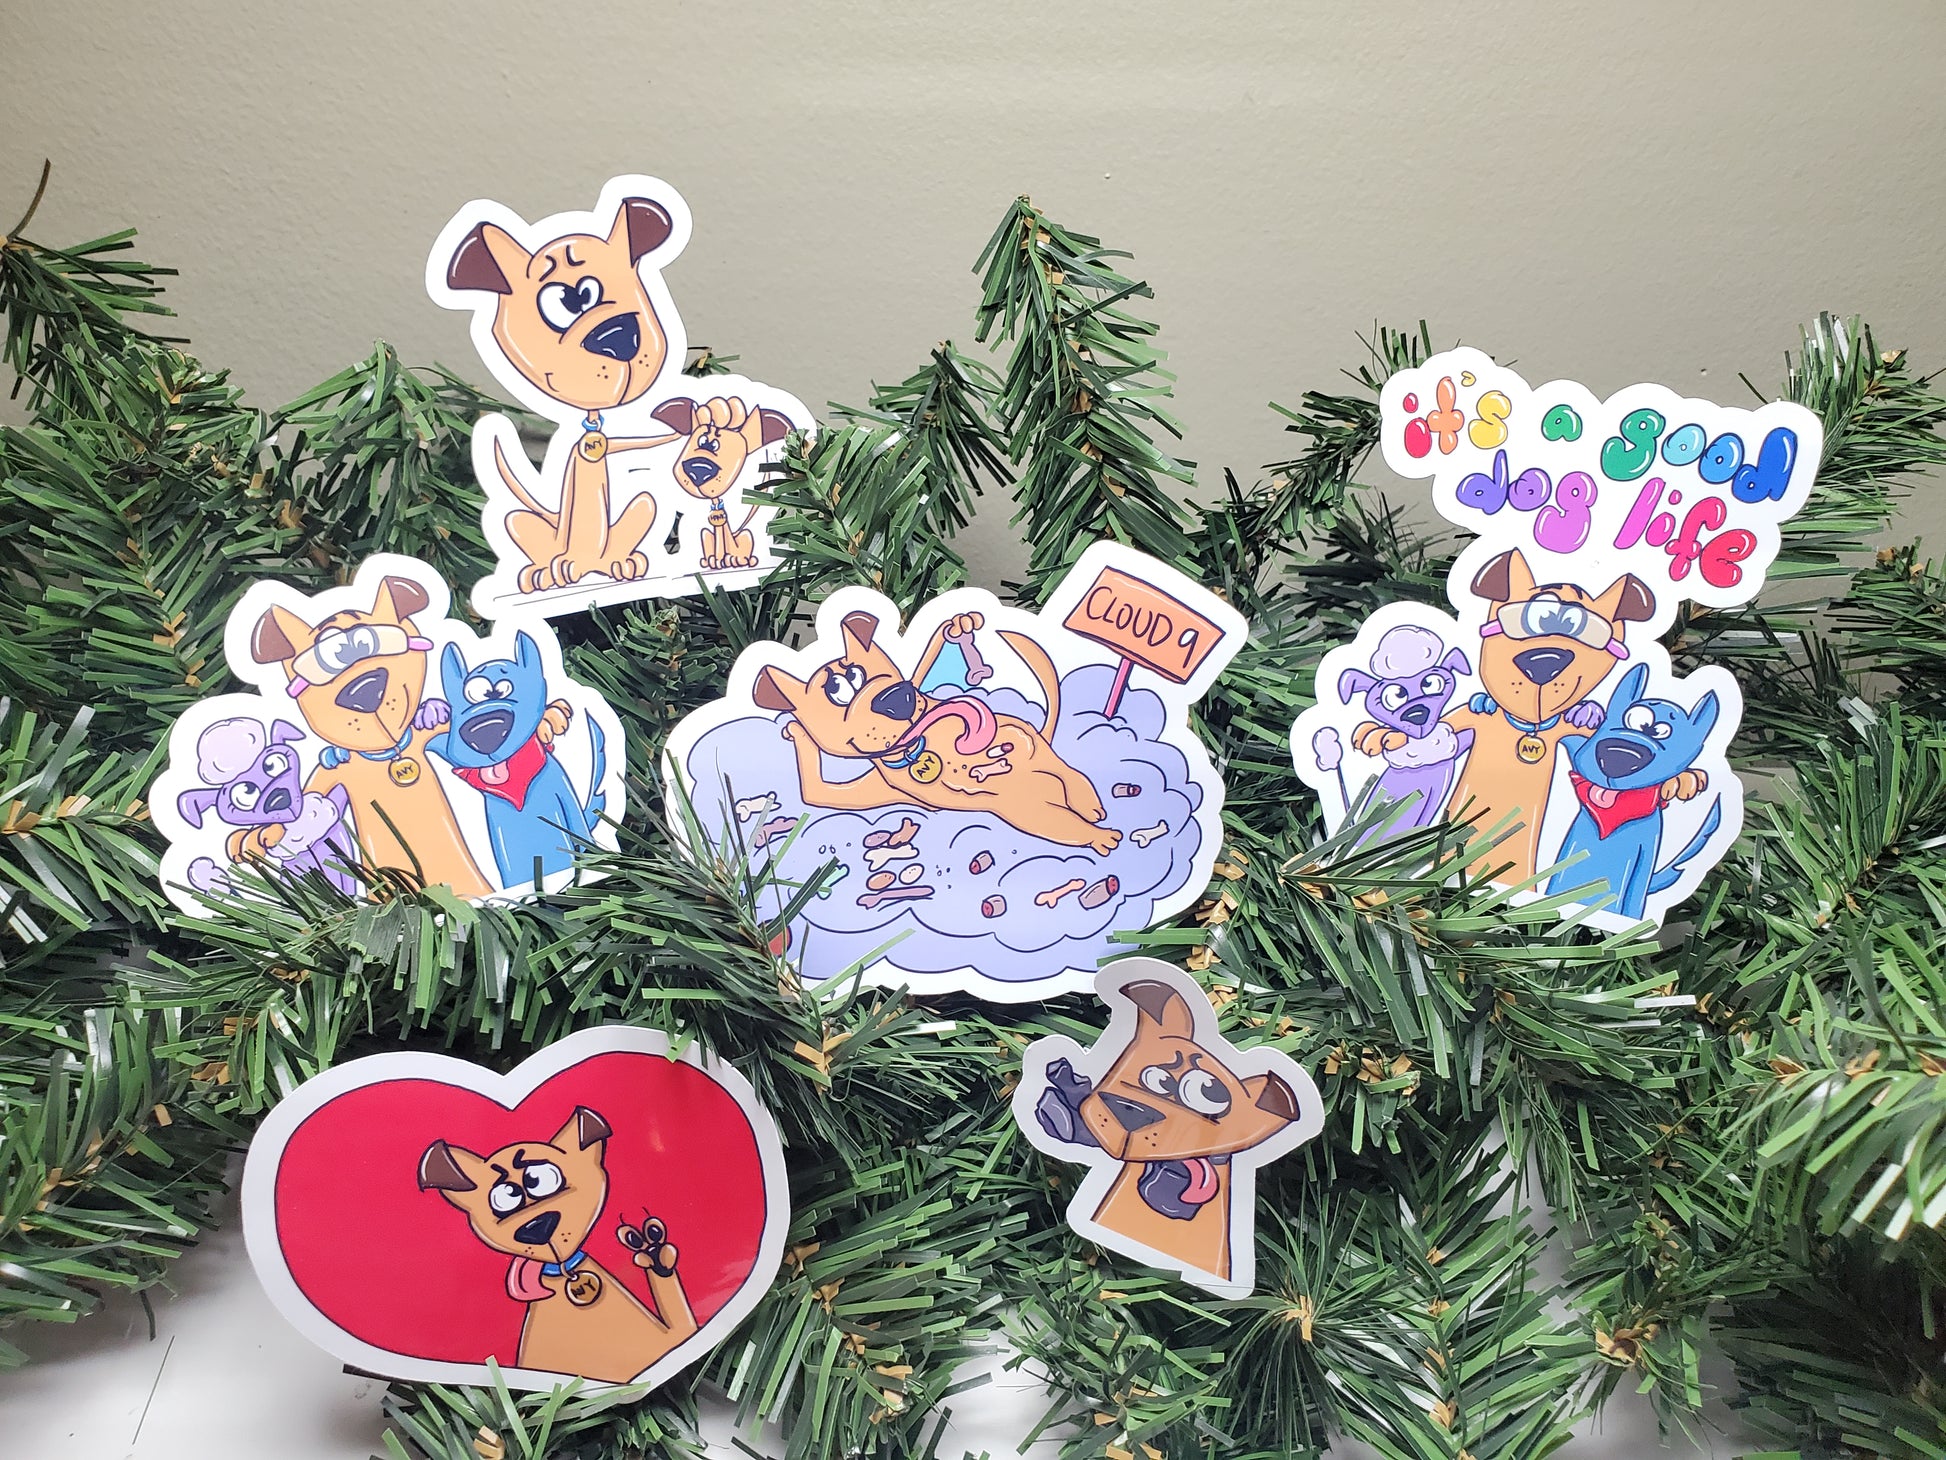 The full collection of stickers from our children's book "WOOF! The Dog That Did Doggy Things!"